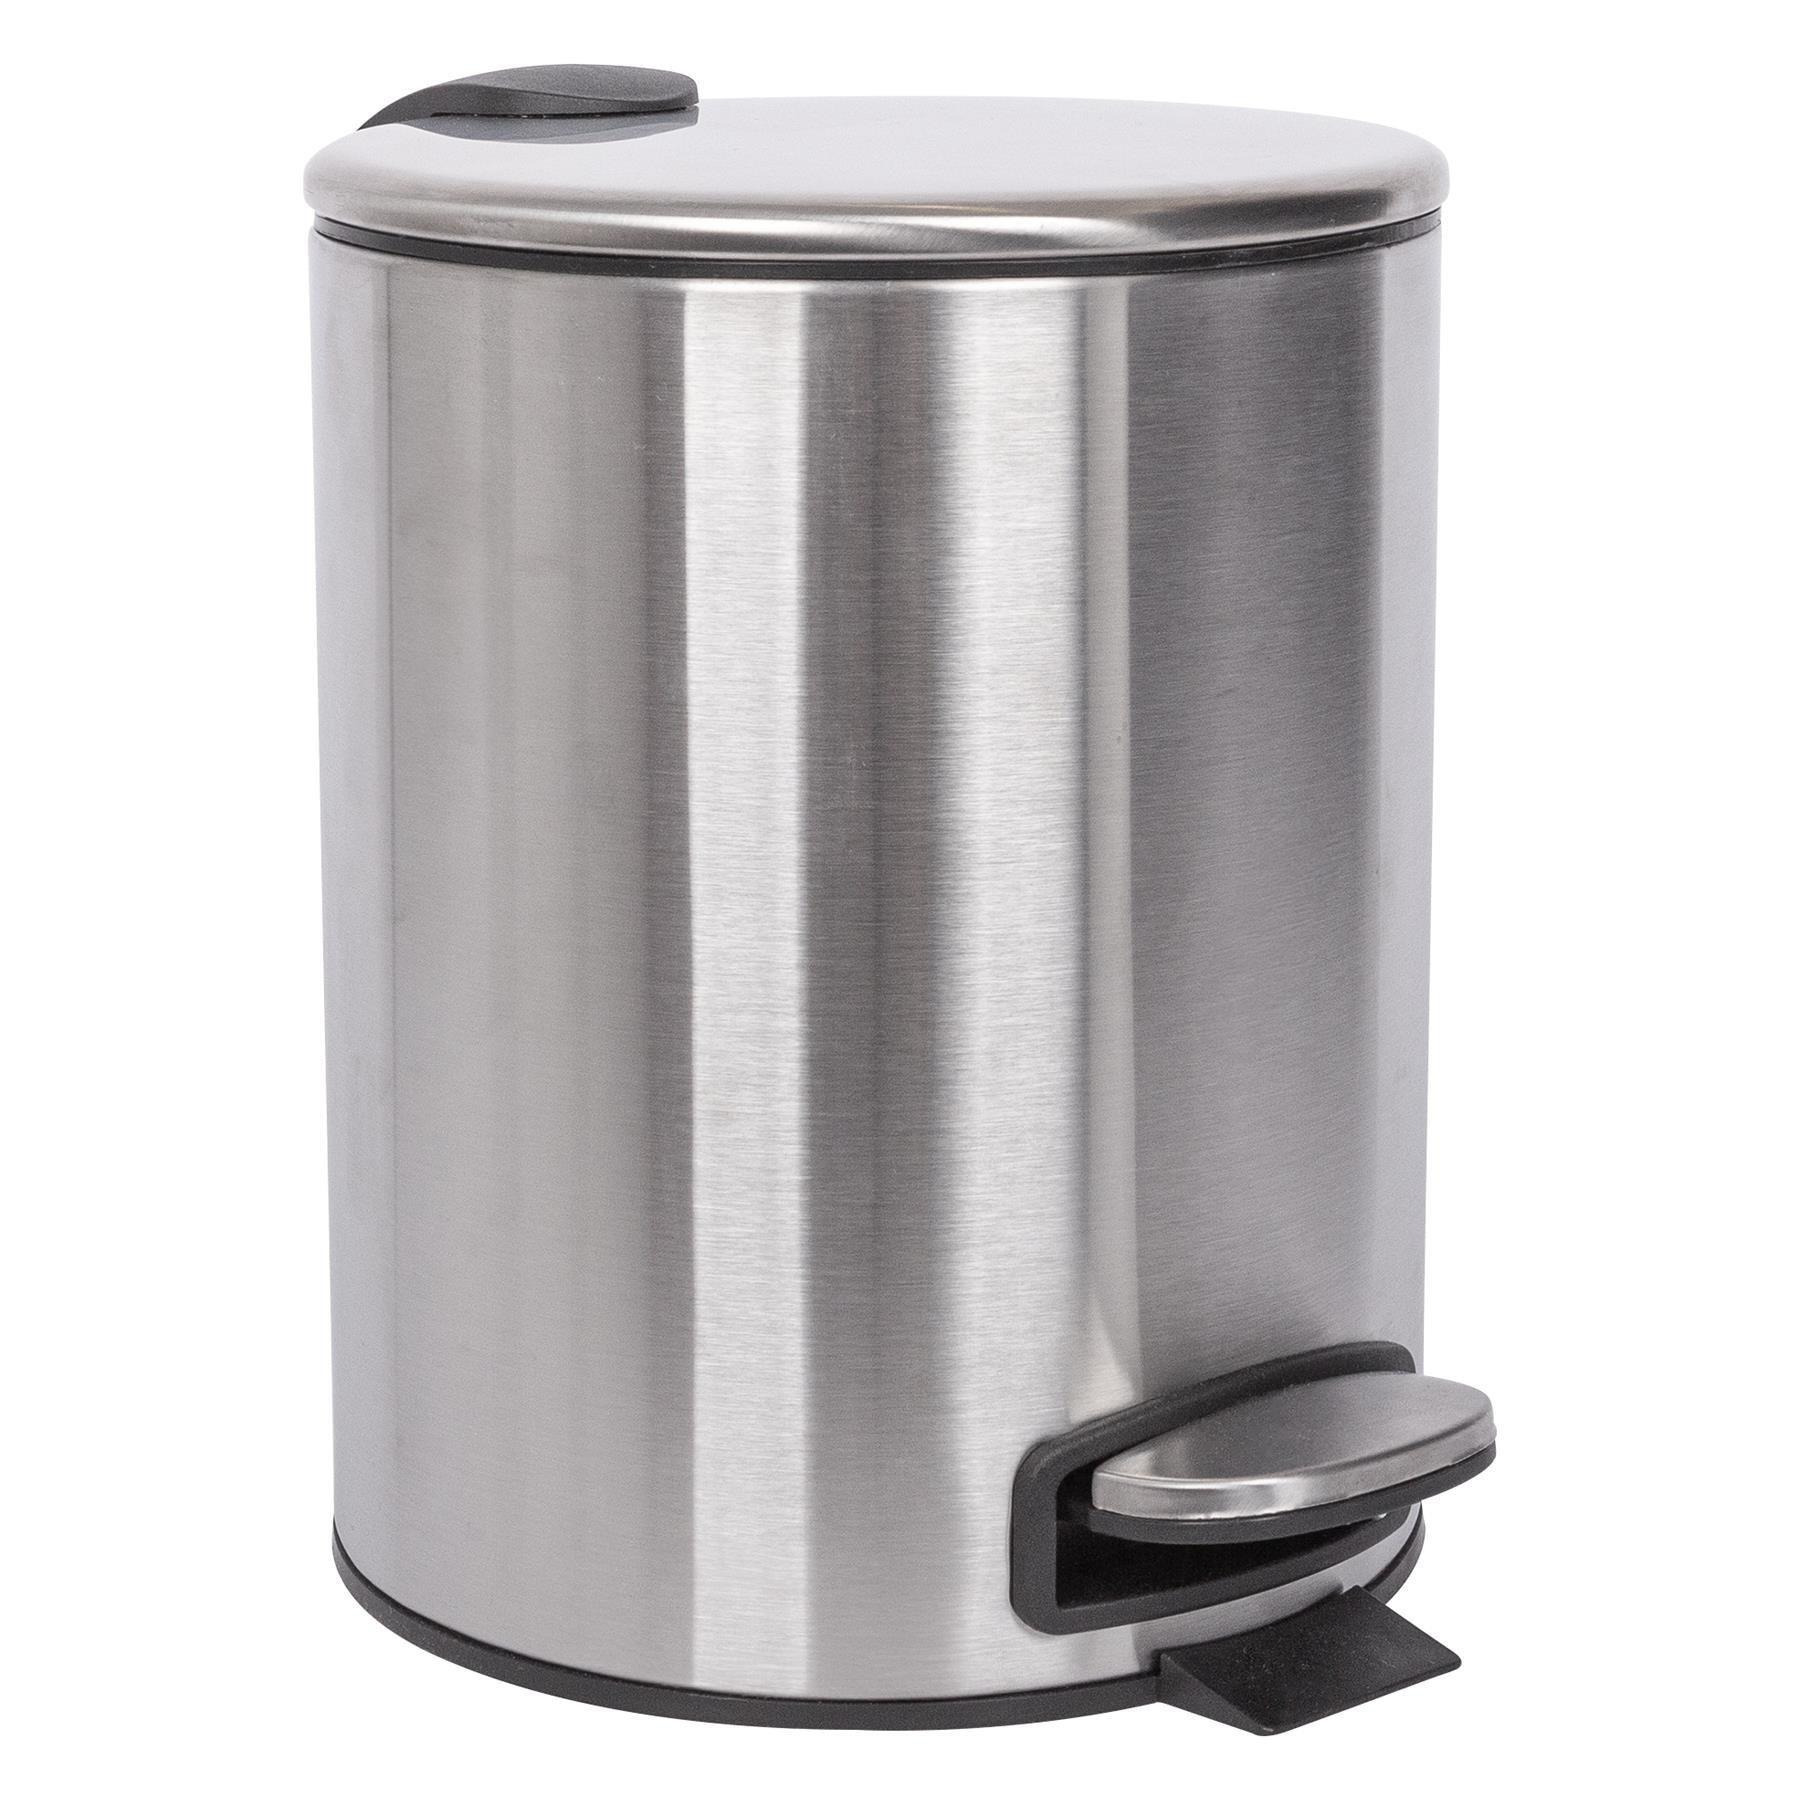 Round Stainless Steel Pedal Bin - 5L - Brushed - image 1